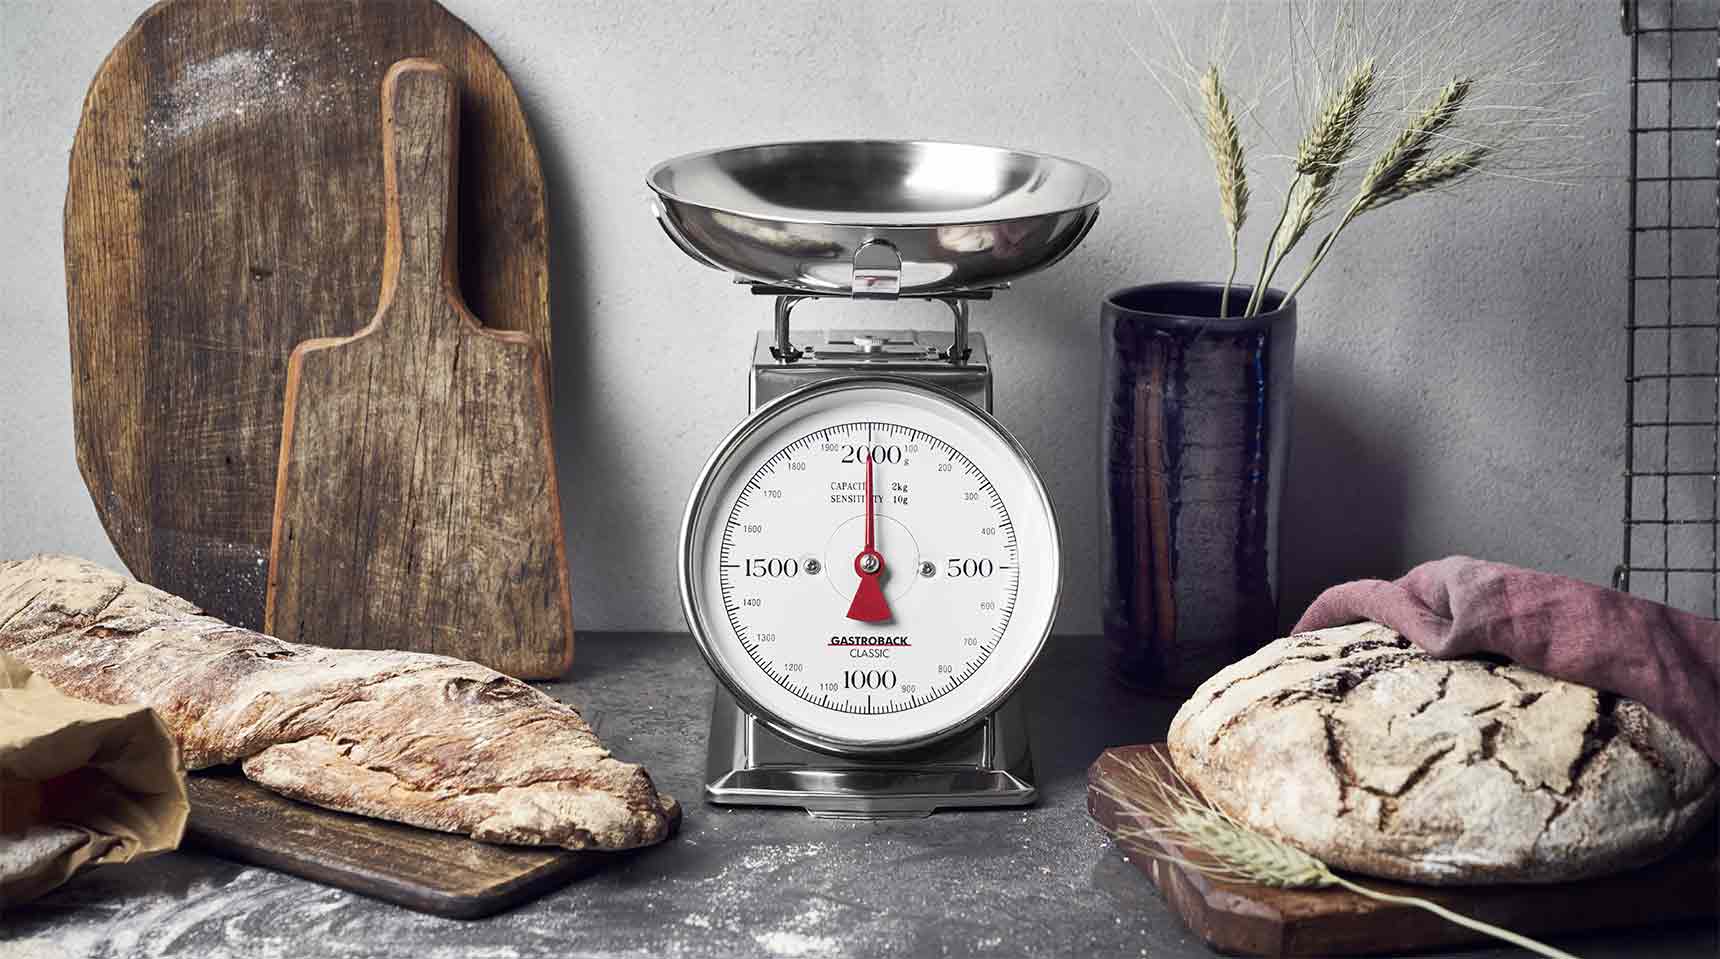 GASTROBACK 30102 Classic scale, accuracy and reliability in the kitchen, EAN: 4016432301024